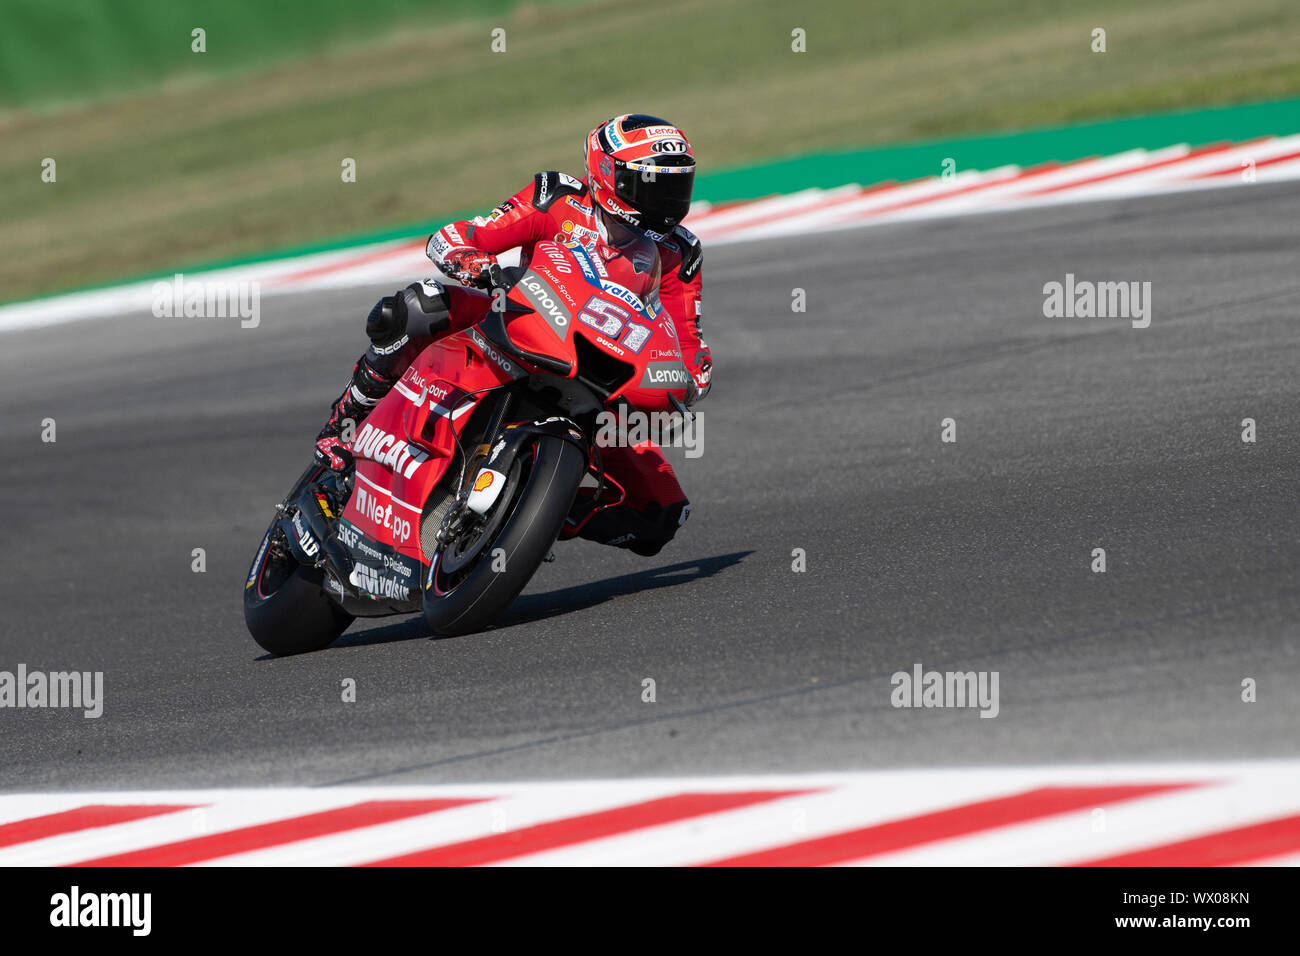 MICHELE PIRRO, ITALIAN DUCATI WILDCARD NUMBER 51 IN MOTOGP during Friday  Free Practice (fp1-fp2) Of The Motogp Of San Marino And Riviera Of Rimini  Stock Photo - Alamy